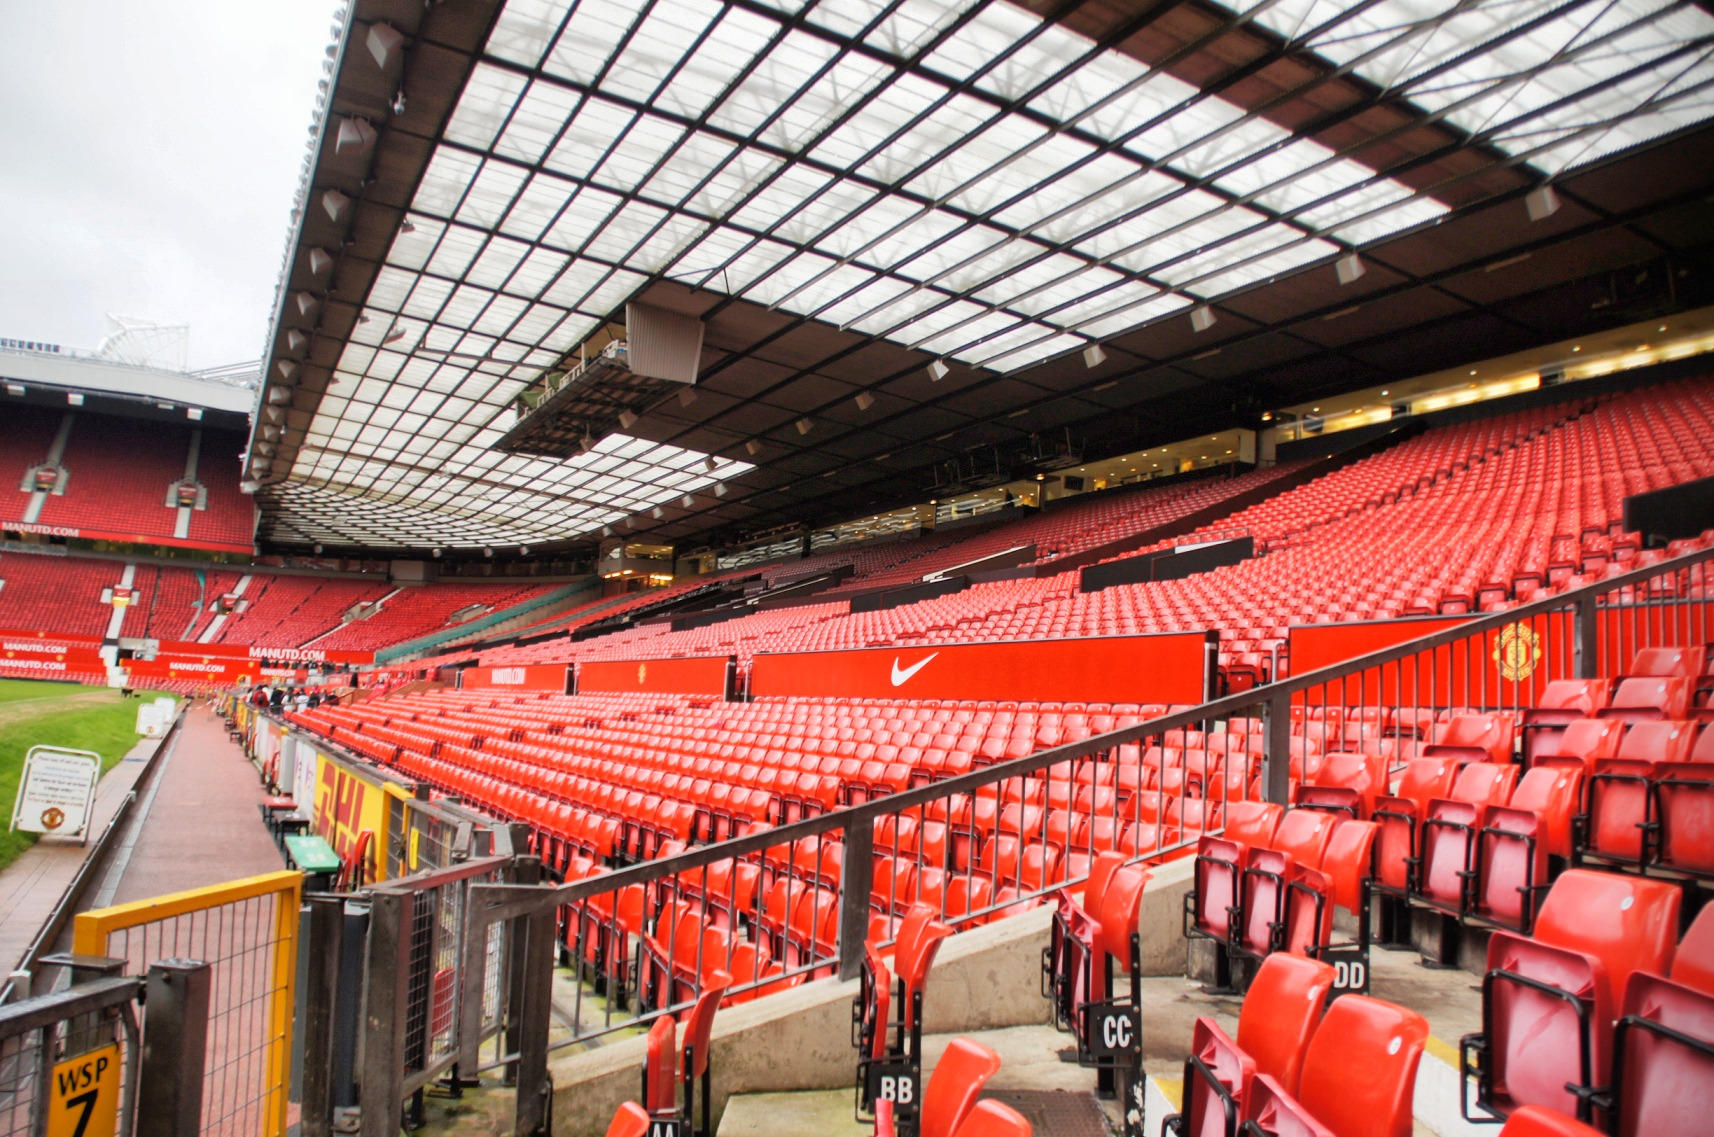 http://stadiony.net/pictures/stadiums/eng/old_trafford/old_trafford05.jpg